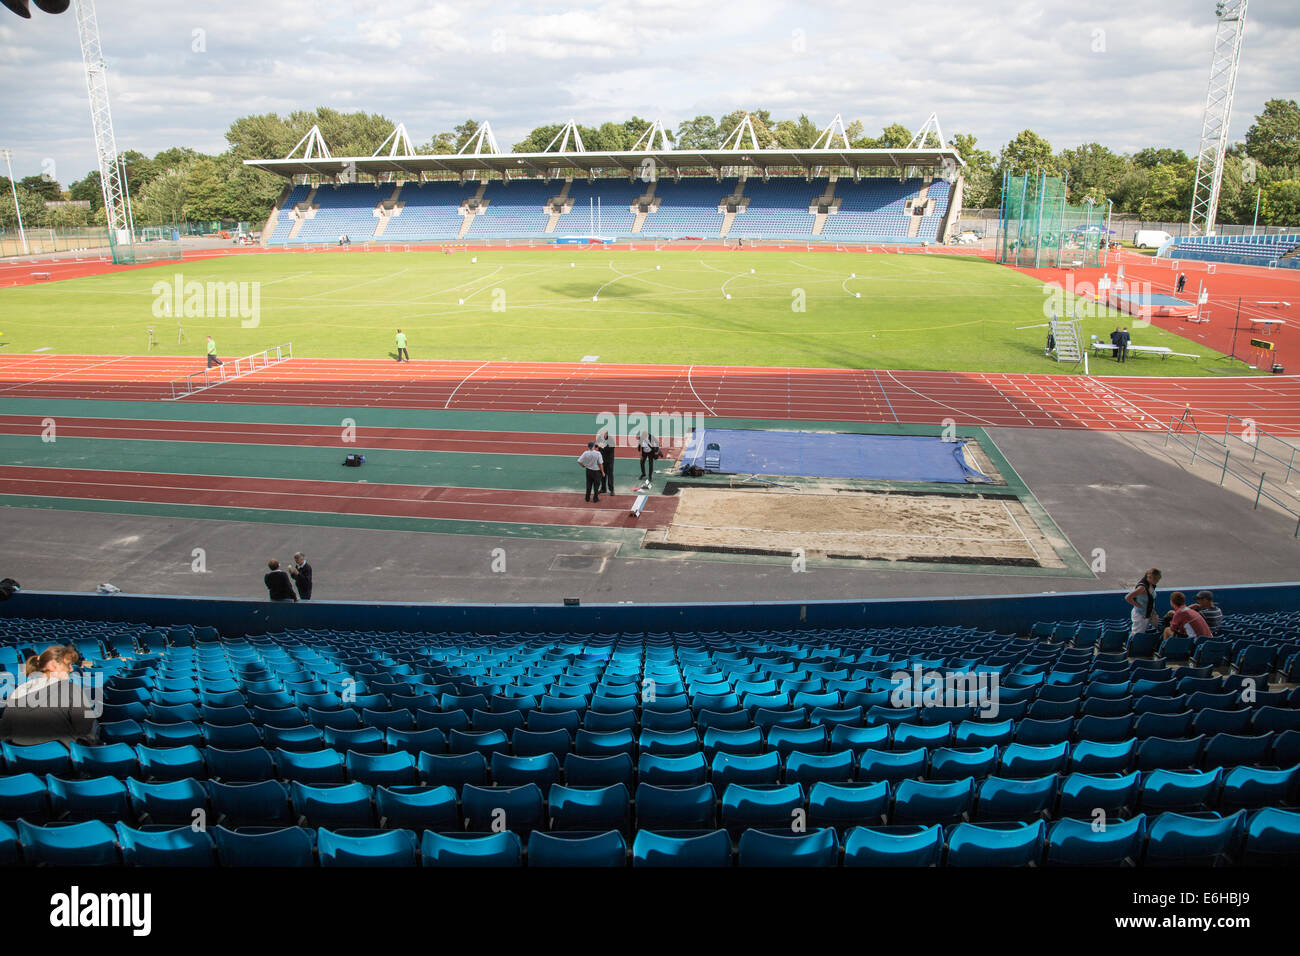 National Sports Centre at Crystal Palace in south London, England Stock Photo